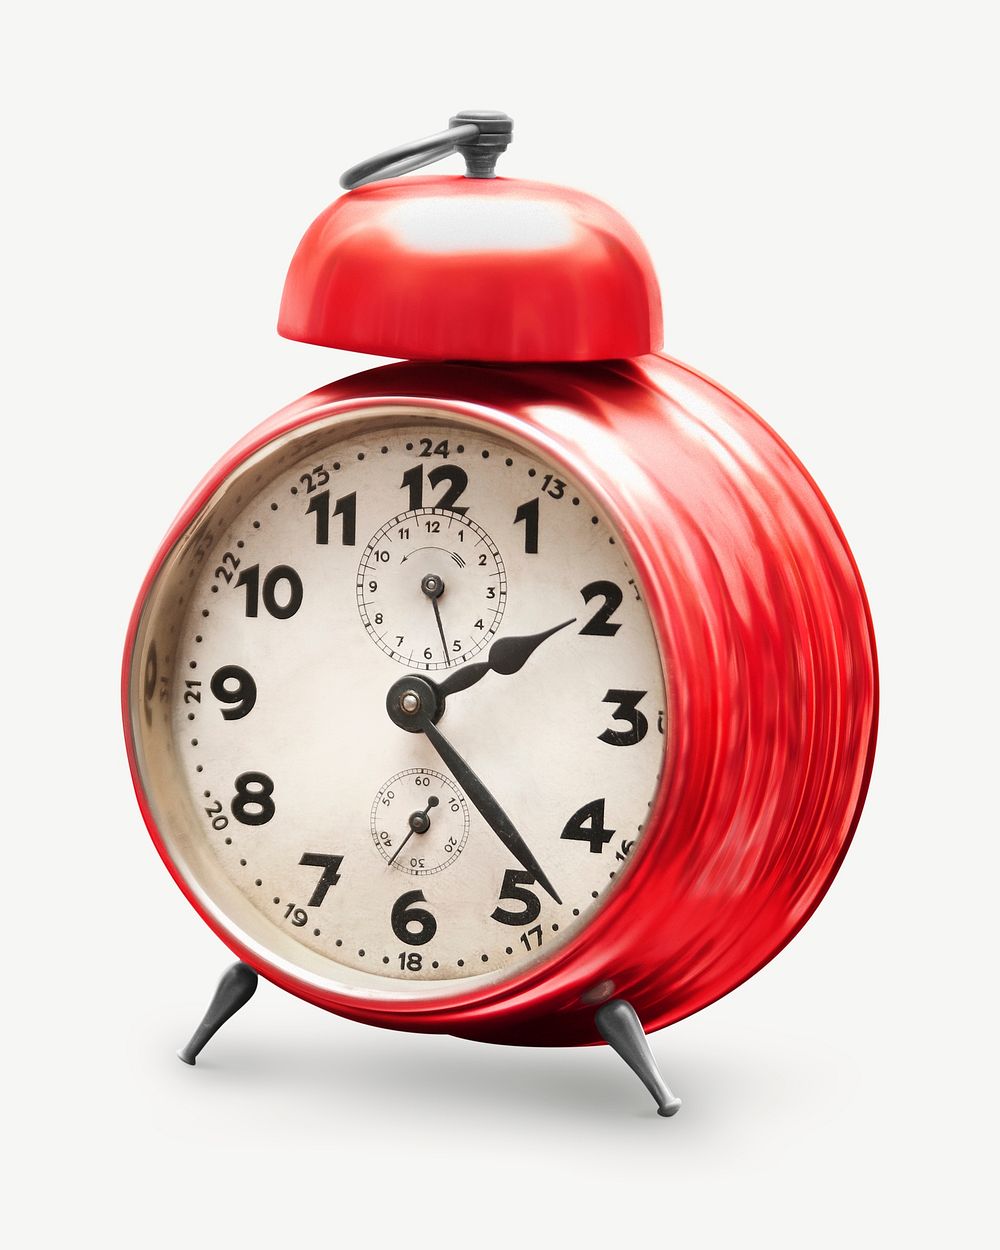 Red alarm clock collage element psd.